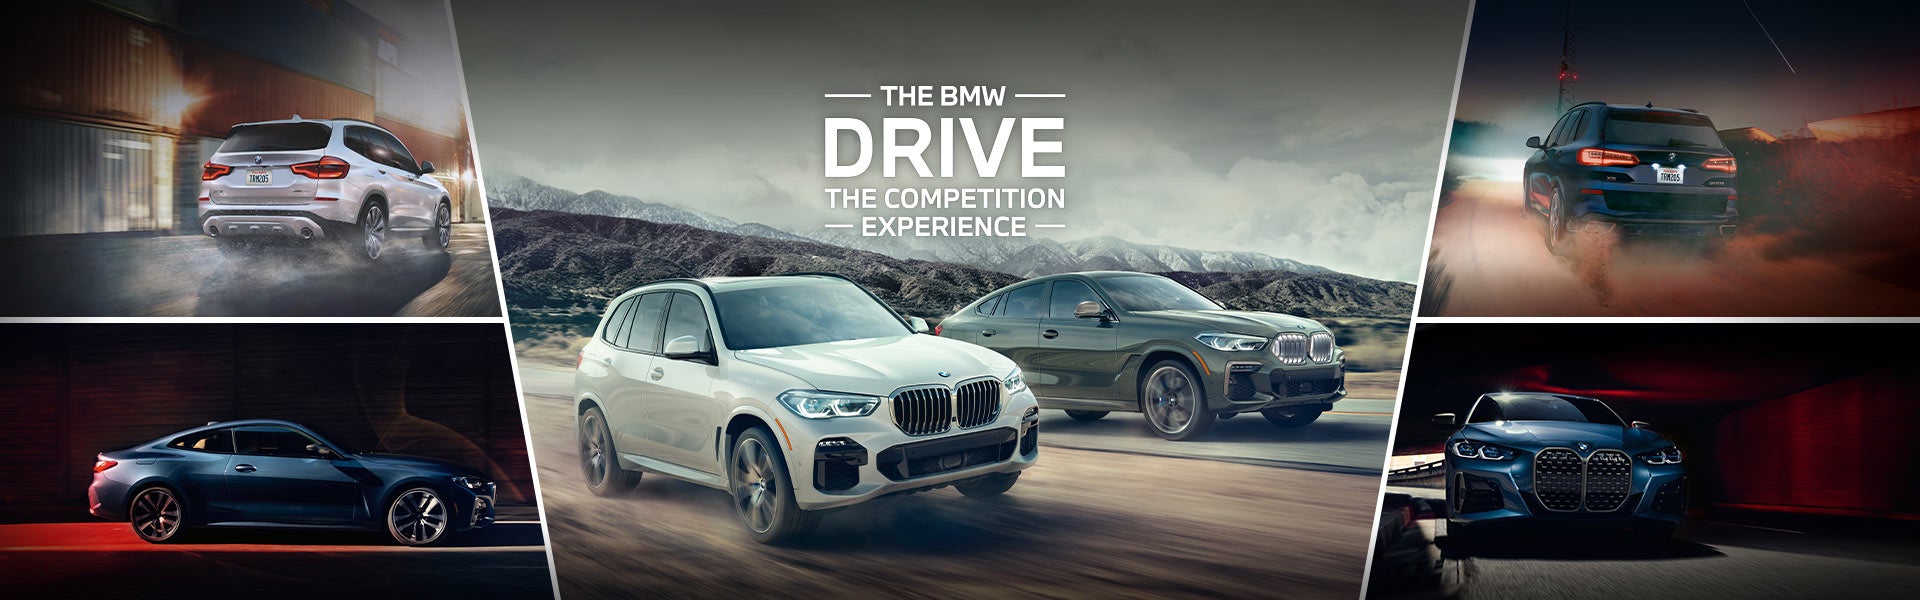 BMW Drive Competition Experience | Tom Bush BMW Jacksonville in Jacksonville FL